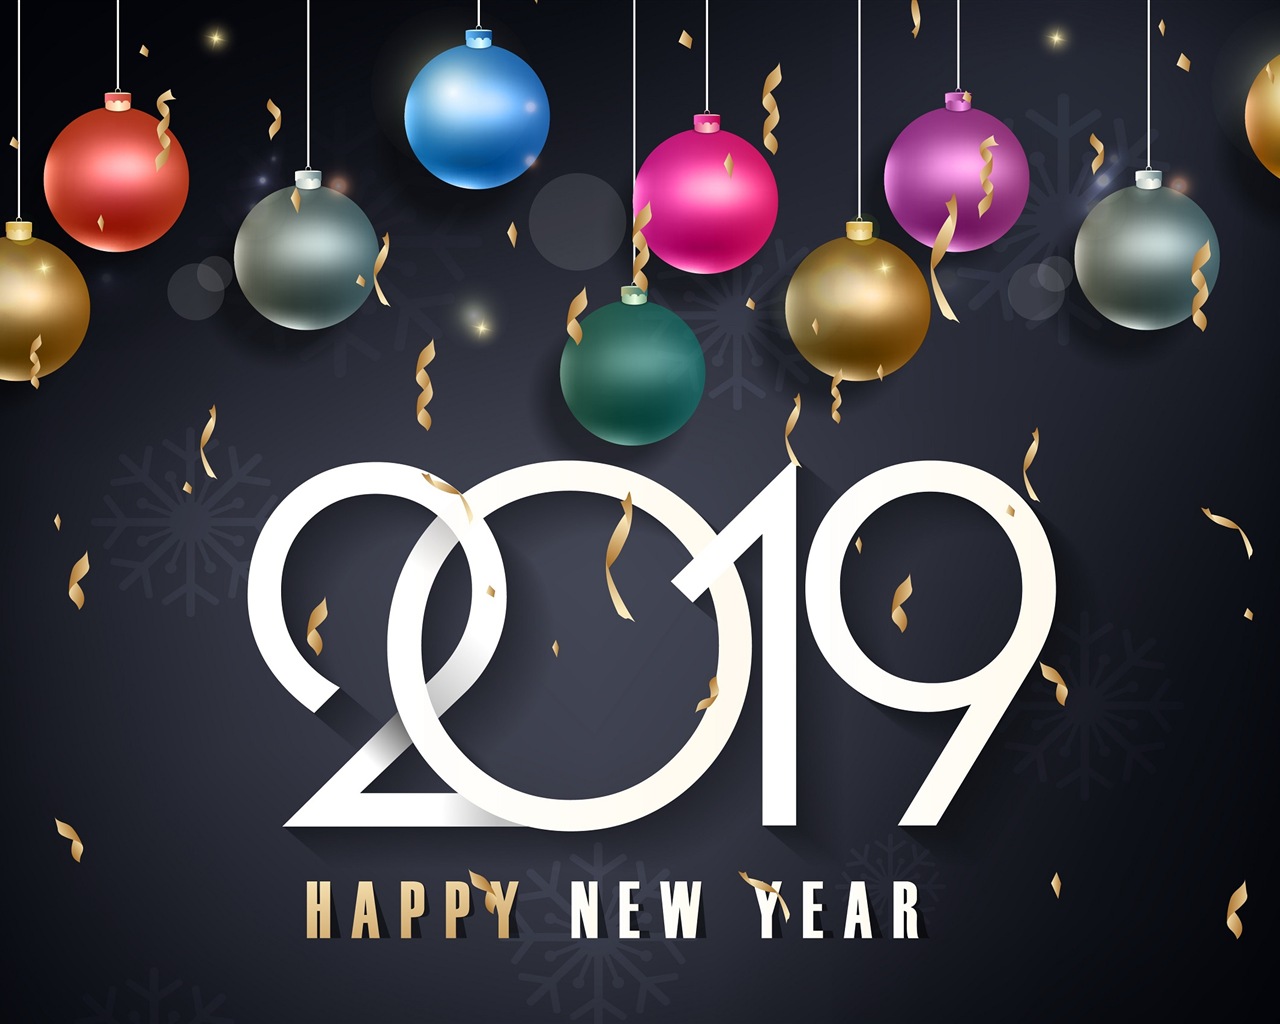 Happy New Year 2019 HD wallpapers #9 - 1280x1024